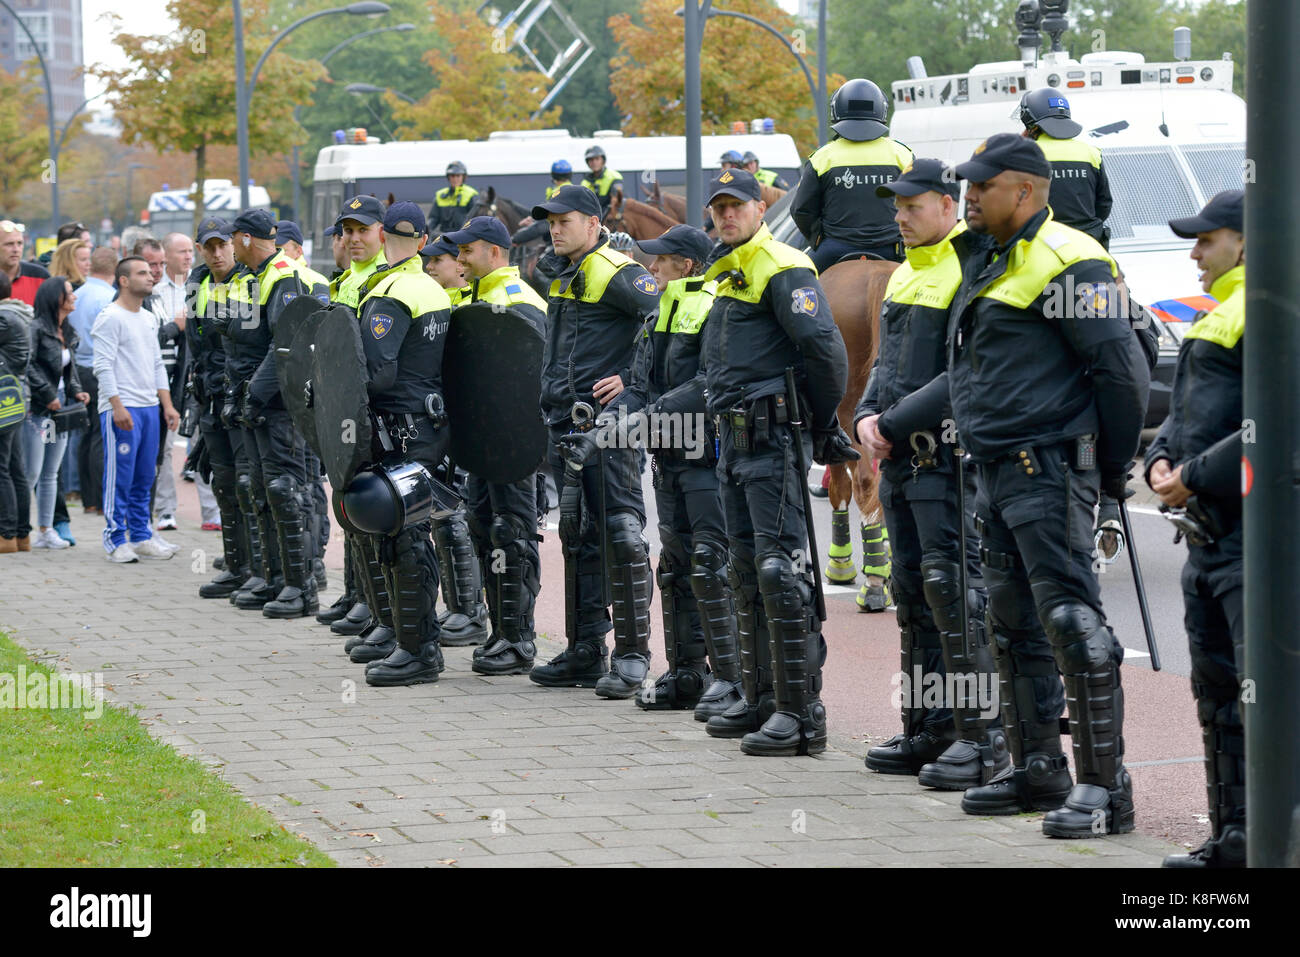 Police taking care of security, during an anti-islam demonstration of Pegida. Pegida is a group of people who are against islamization in Europe. Stock Photo